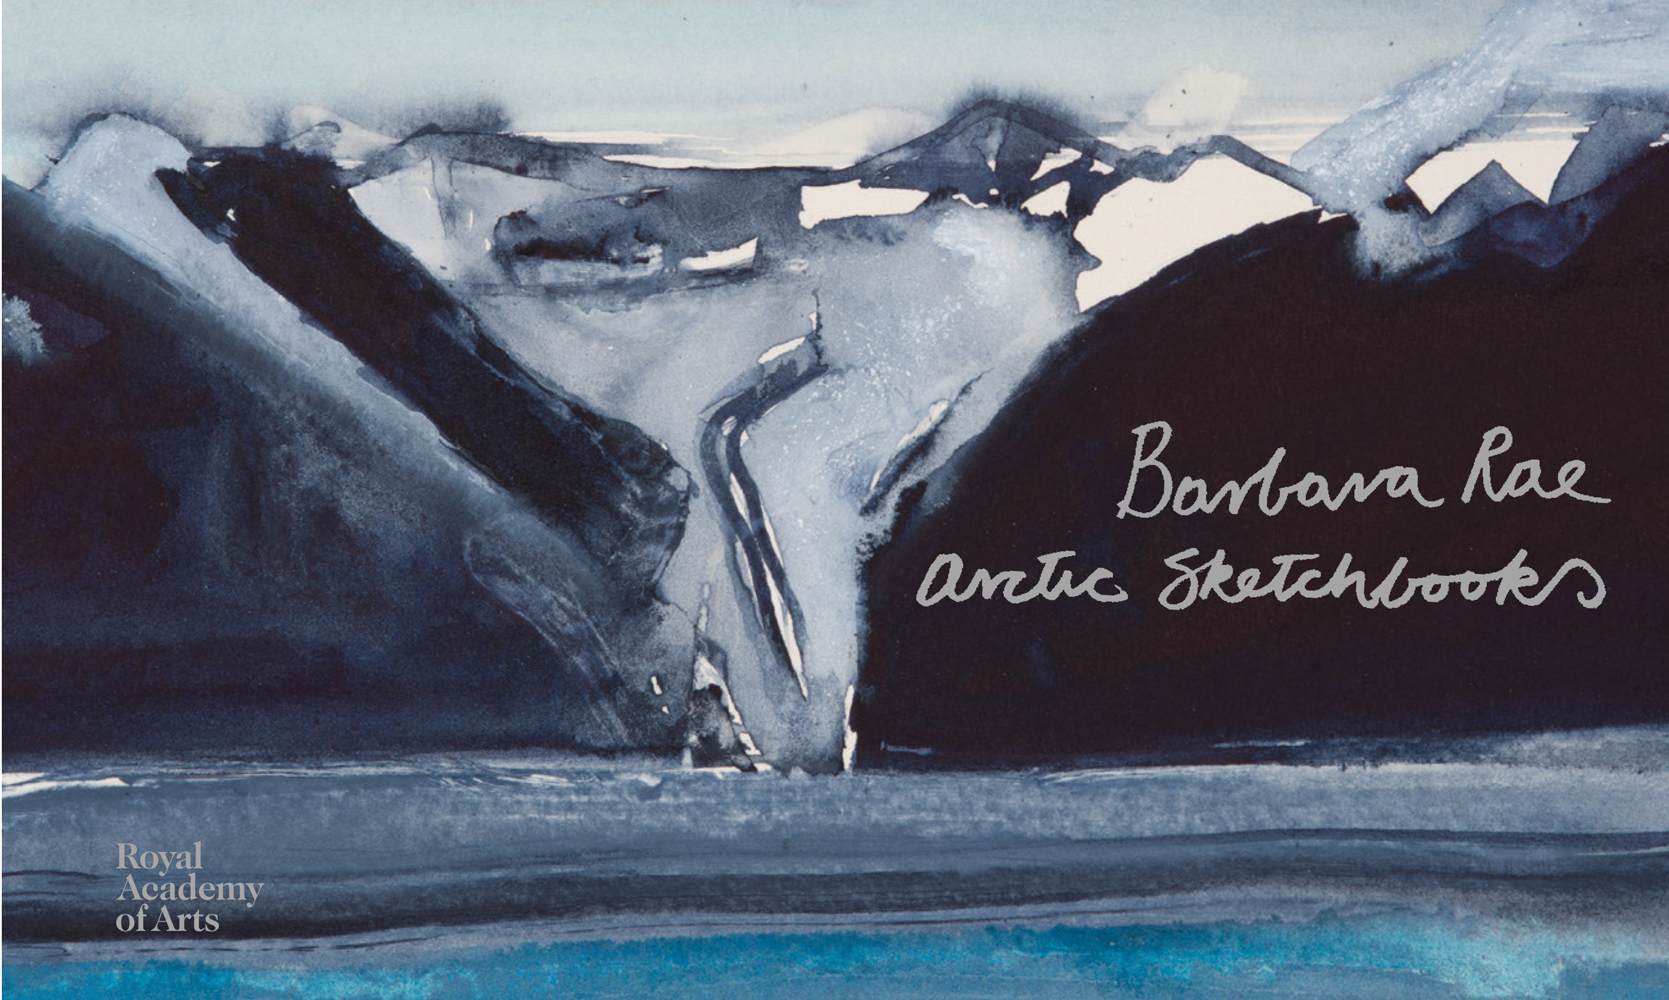 Sketched painting of artic landscape in blue and white, to landscape cover of 'Barbara Rae artic sketchbooks', by Royal Academy of Arts.